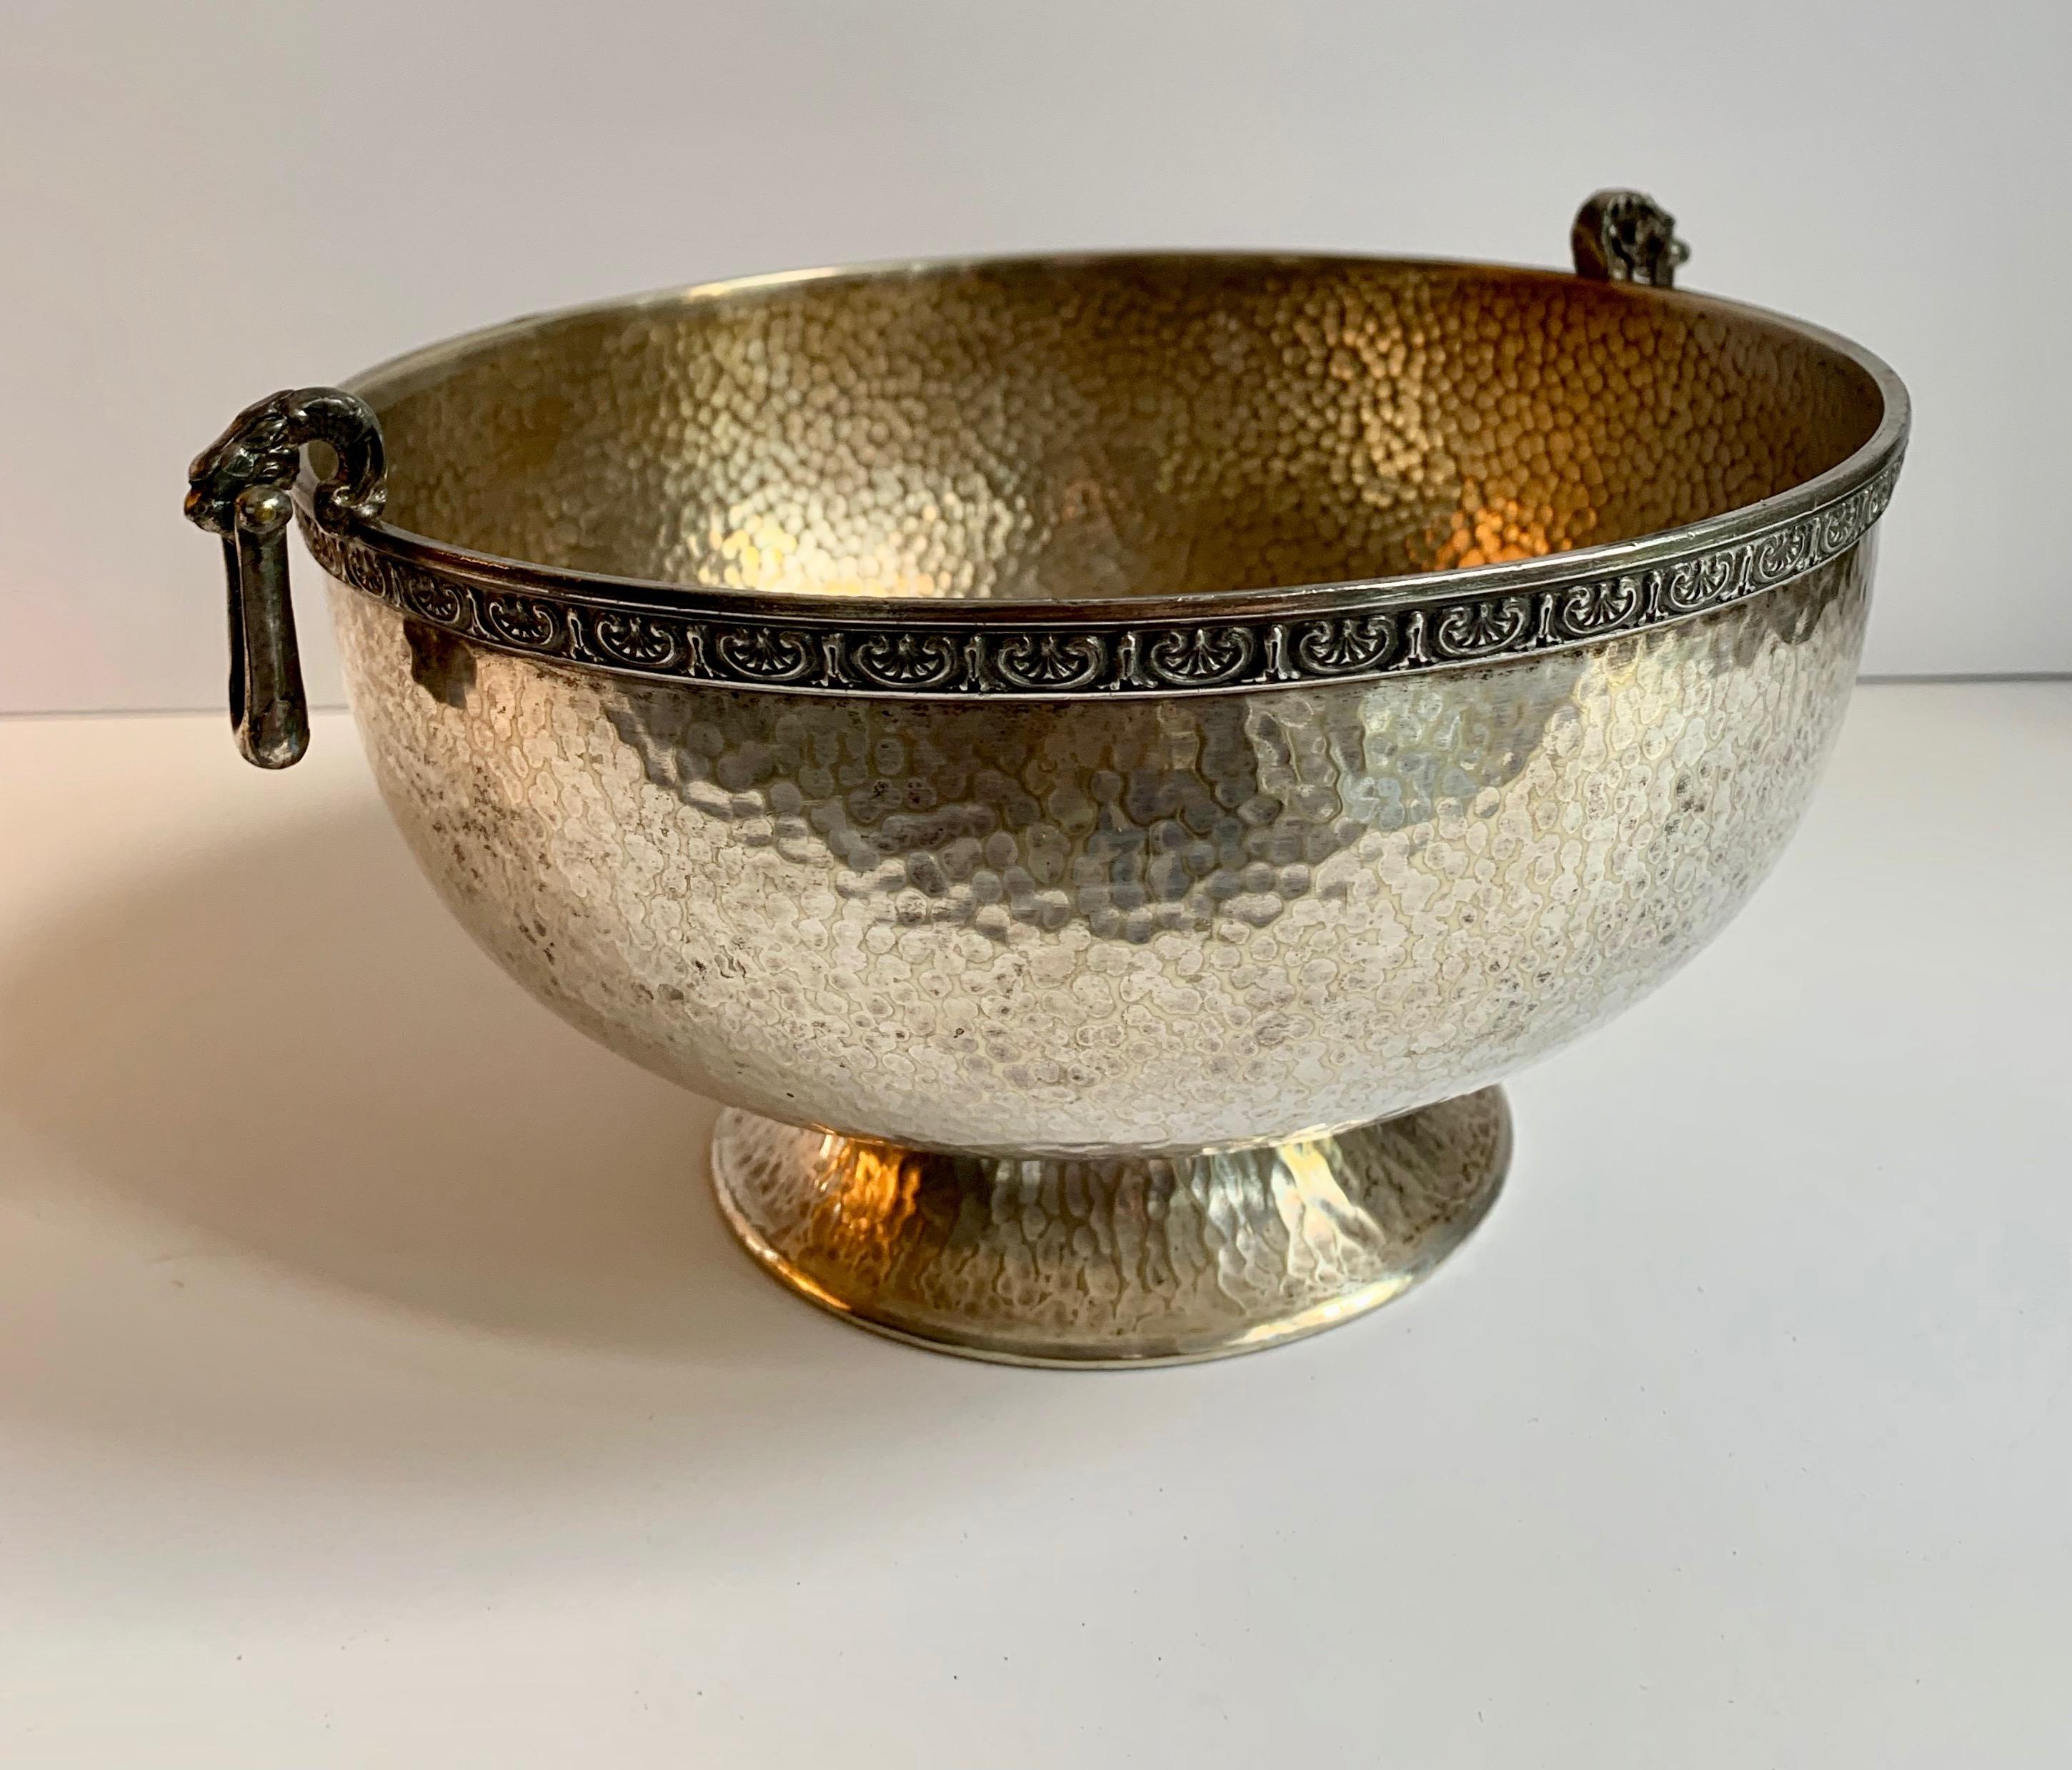 Hammered silver bowl with handle and rim detailing, a wonderful decorative bowl with great practical appeal. The rim is a fabulous detailed scroll reminiscent of a Greek key, with dangling rectangular detailing, similar to wonderful earrings.